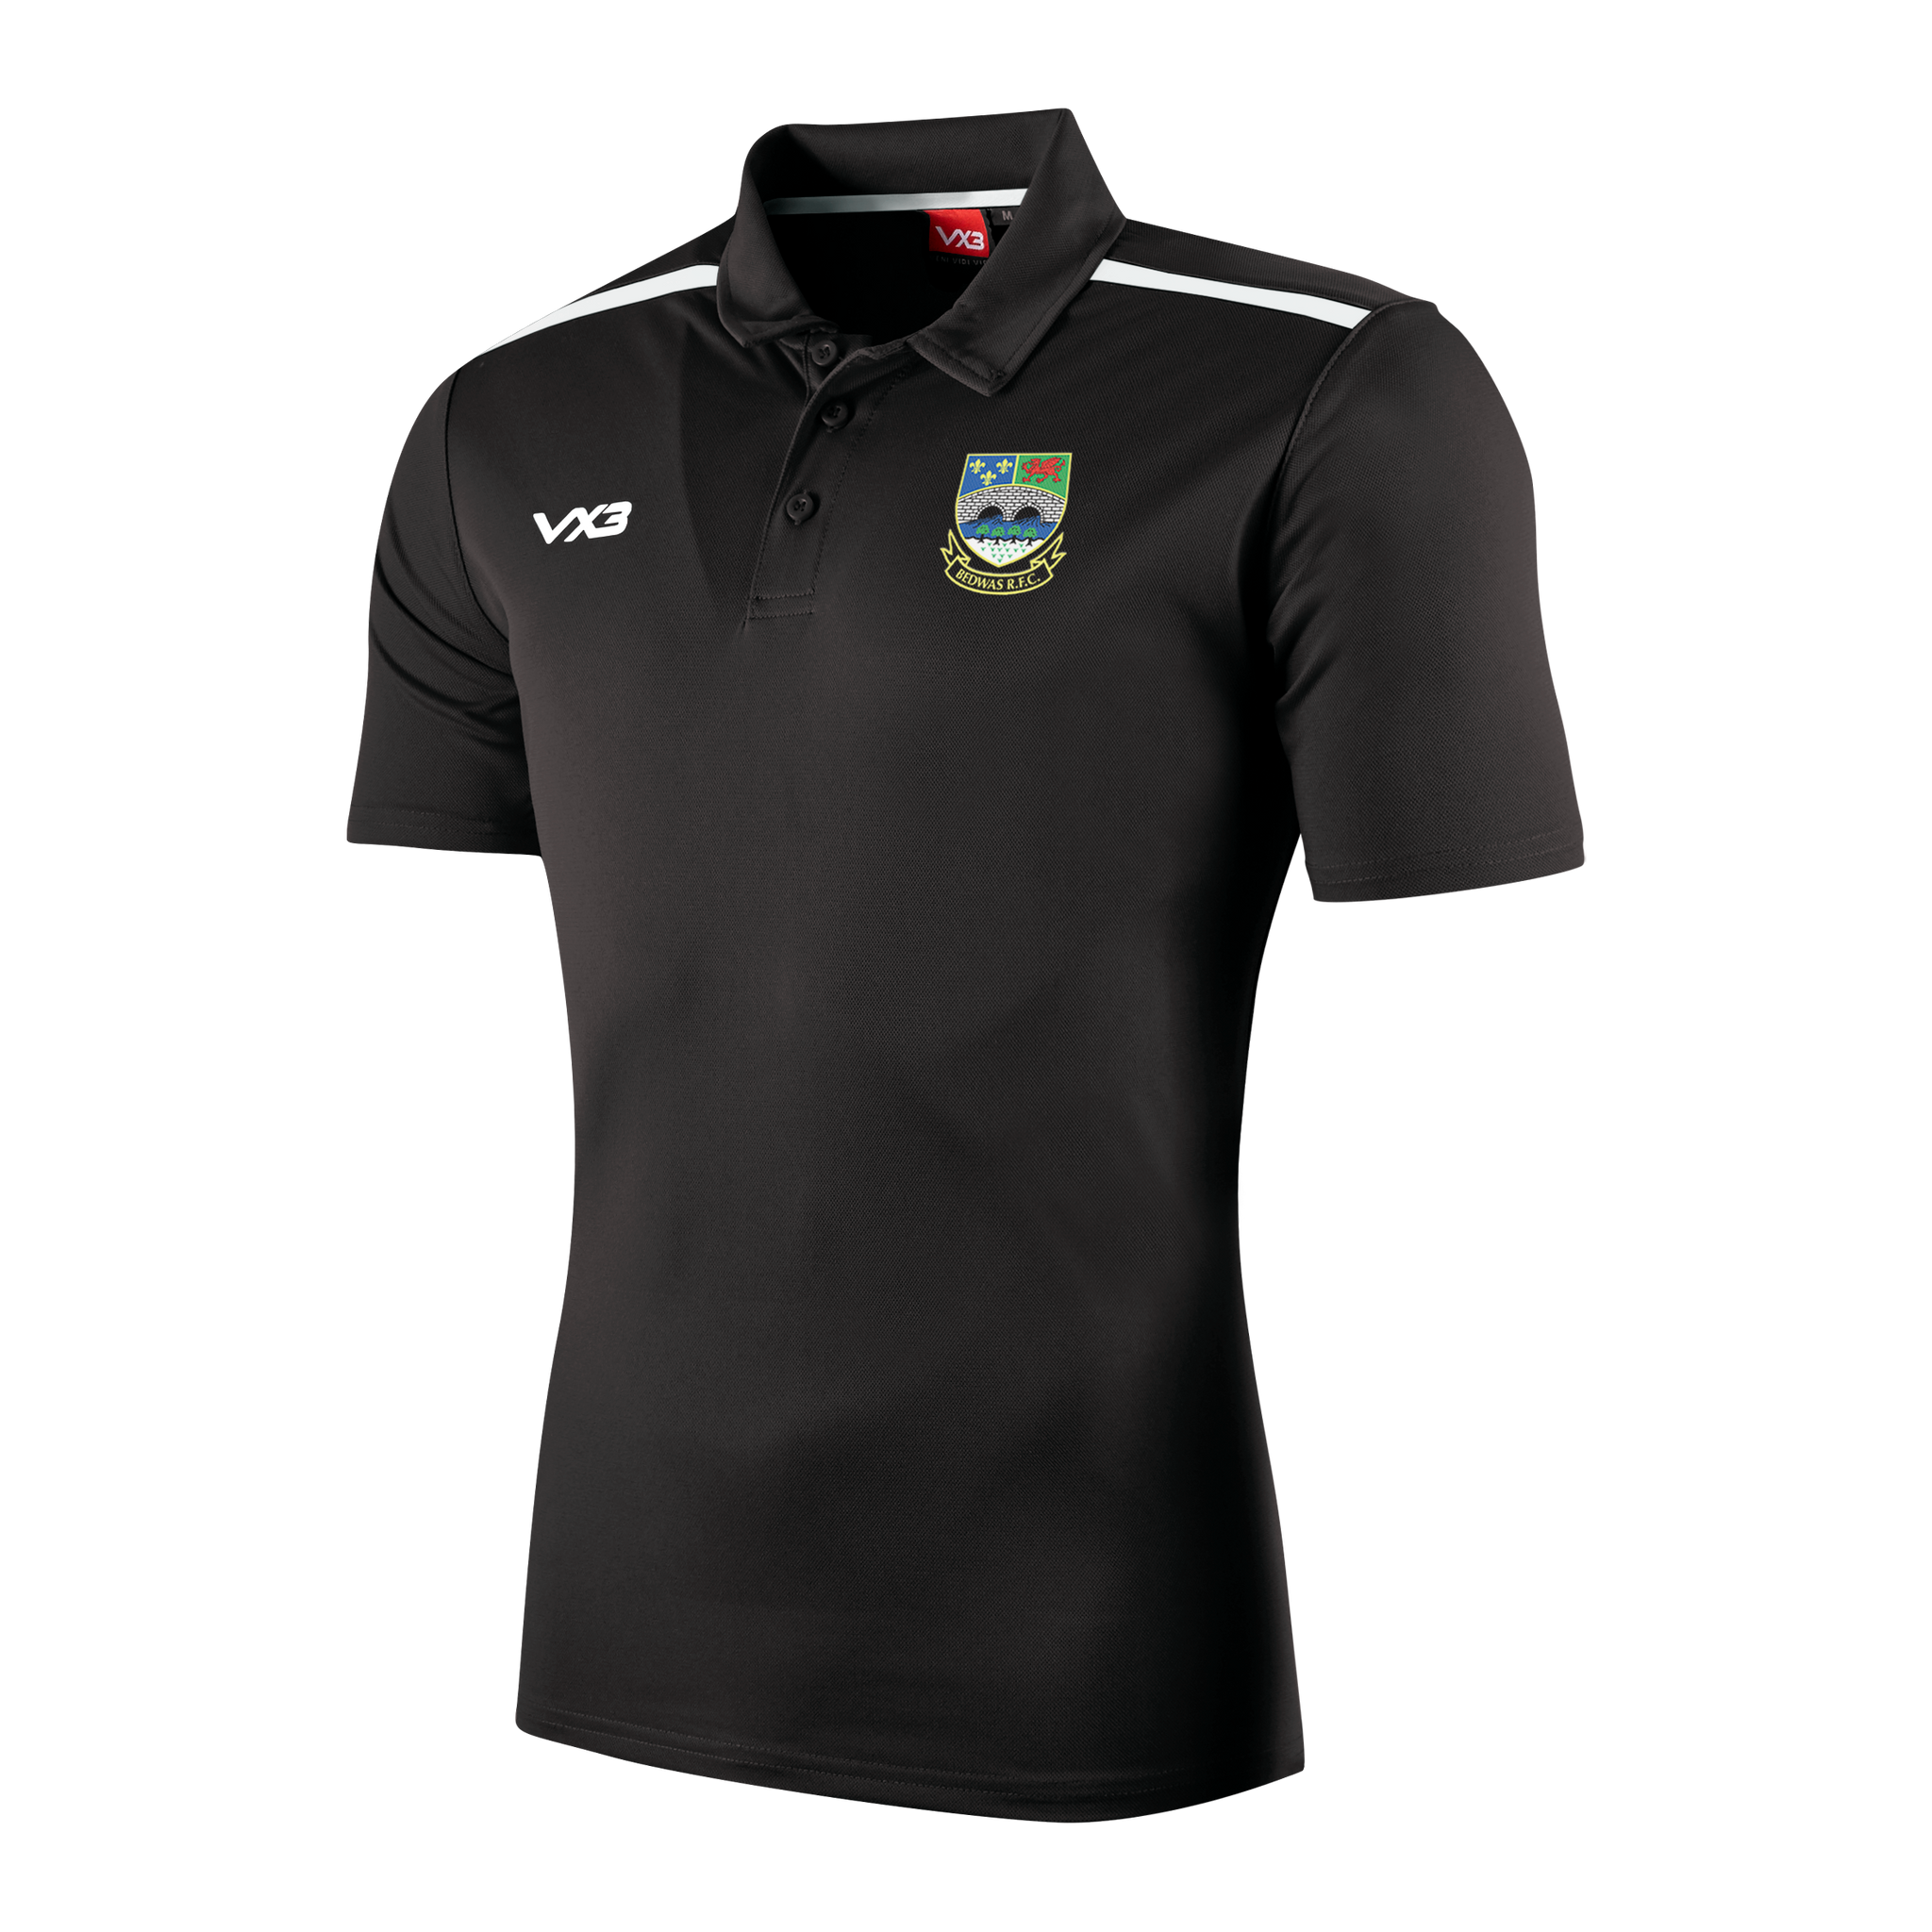 Bedwas RFC Fortis Youth Polo